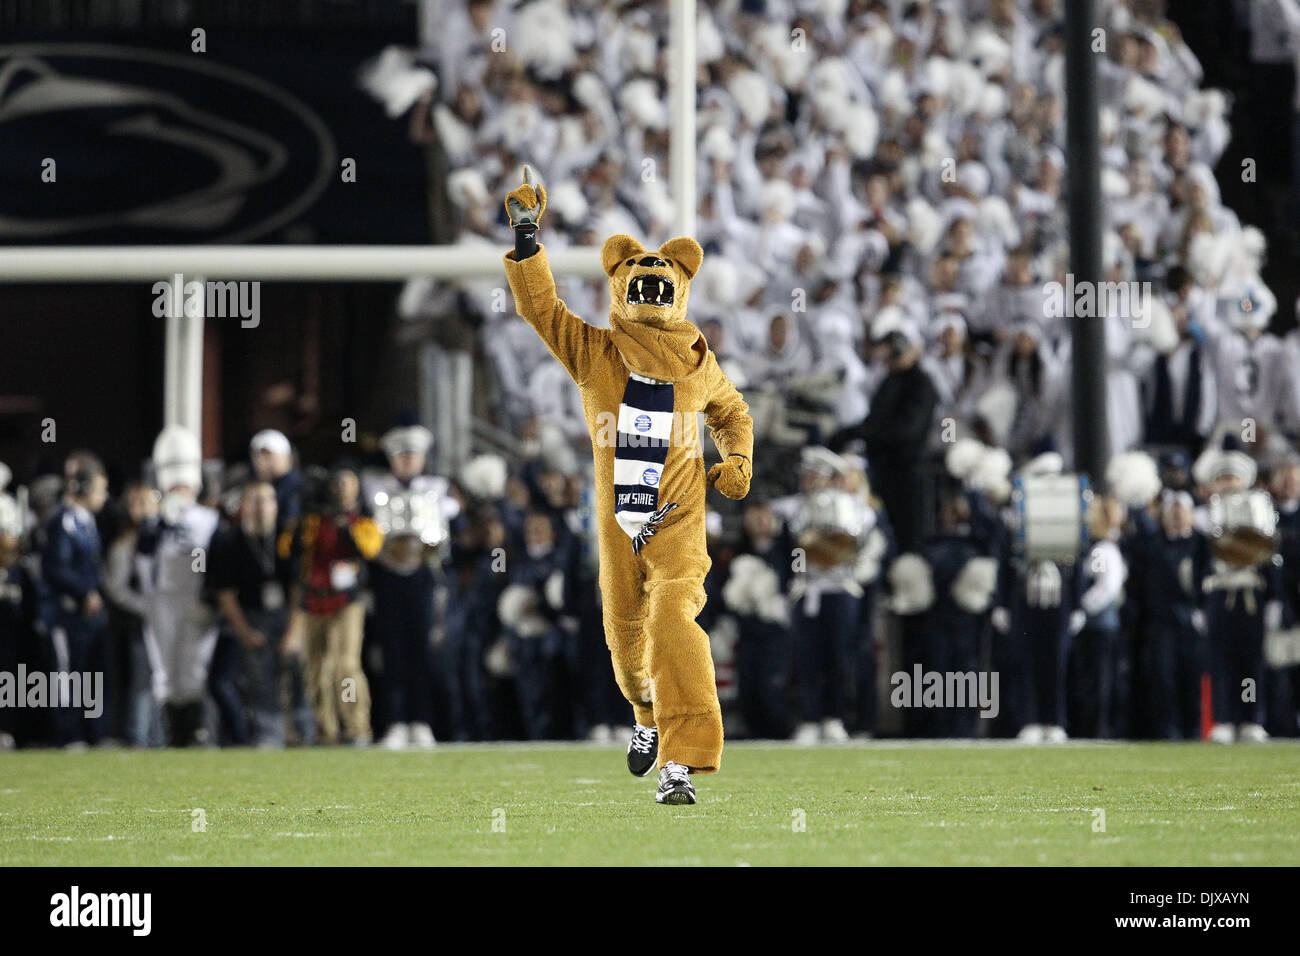 Oct. 30, 2010 - State College, Pennsylvania, United States of America - Penn State Nittany Lions Mascot in action in the game held at Beaver Stadium in State College, Pennsylvania.   Penn State defeated Michigan 41-31 (Credit Image: © Alex Cena/Southcreek Global/ZUMApress.com) Stock Photo